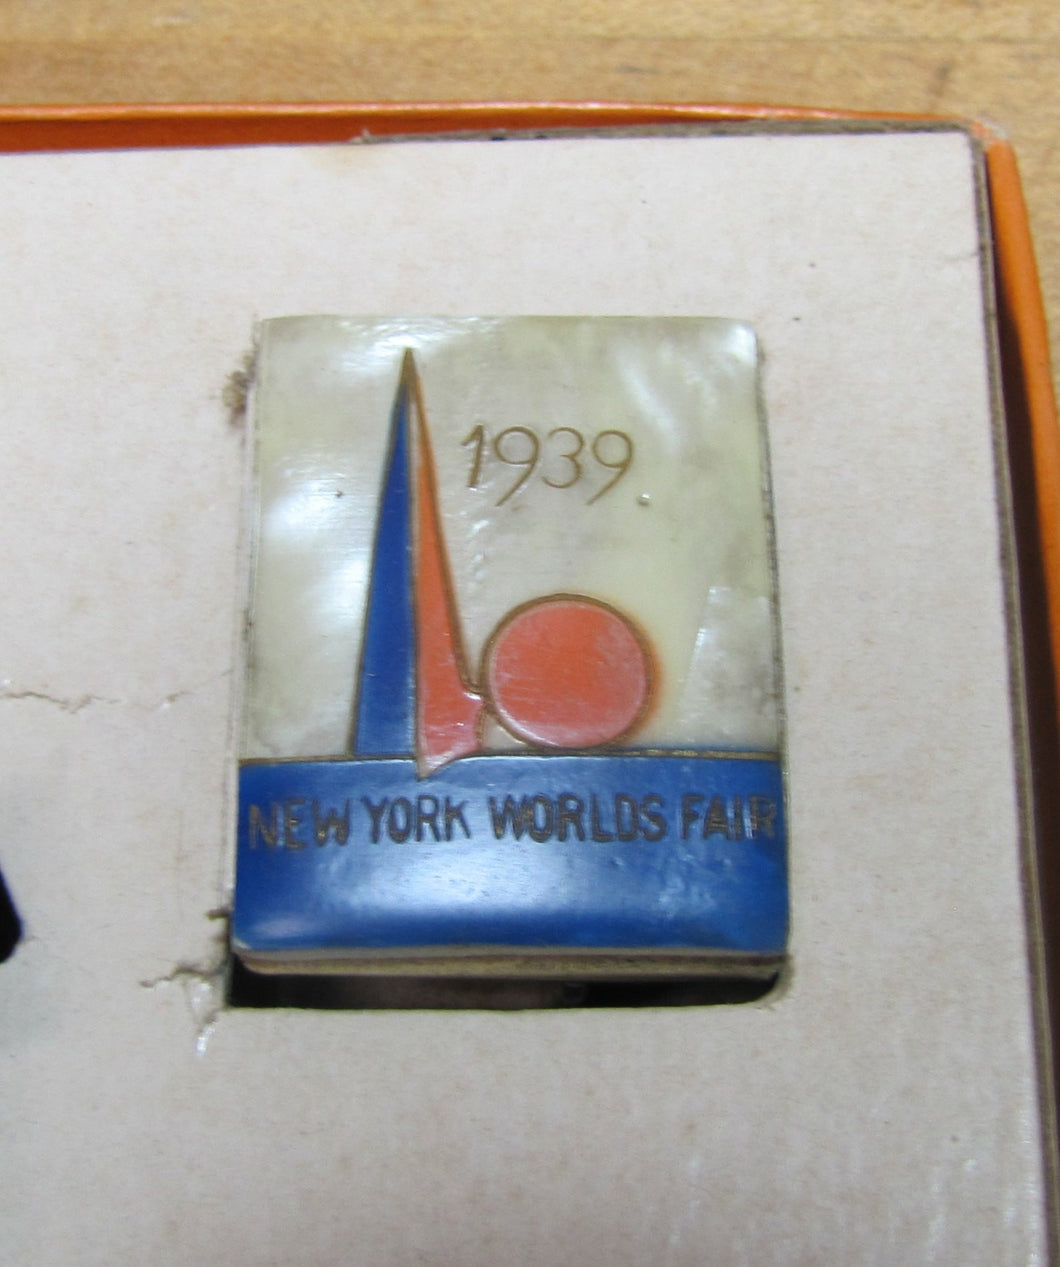 1939 NYWF MOTHER OF PEARL BUCKLE & BELT Set NEW YORK WORLD'S FAIR Souvenir Rare Hard to Find